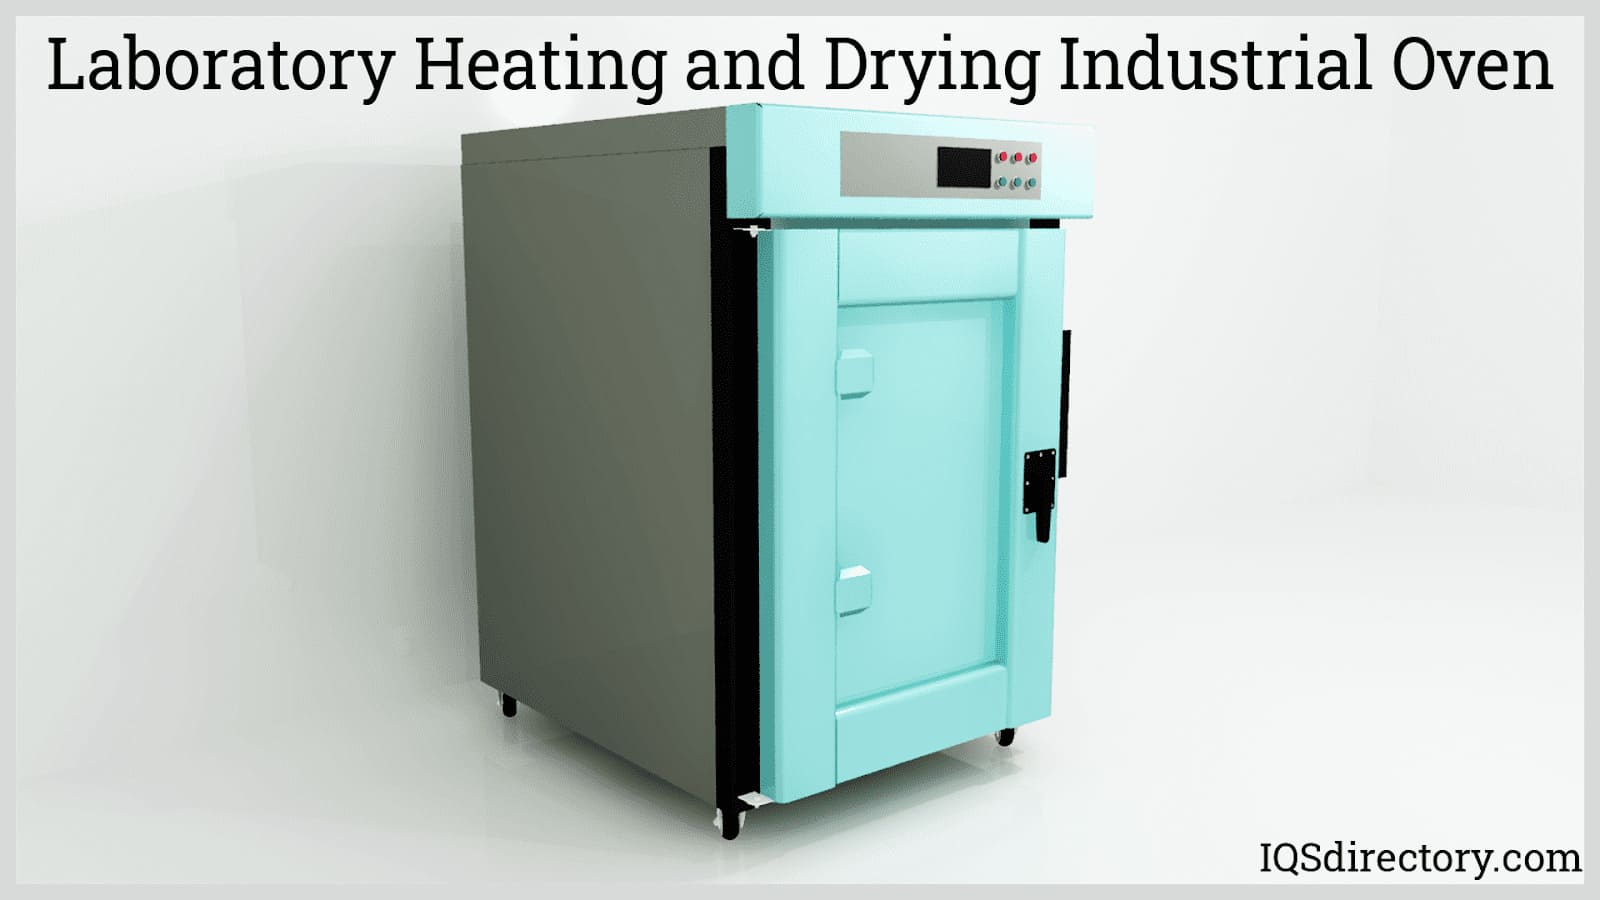 Laboratory Heating and Drying Industrial Oven